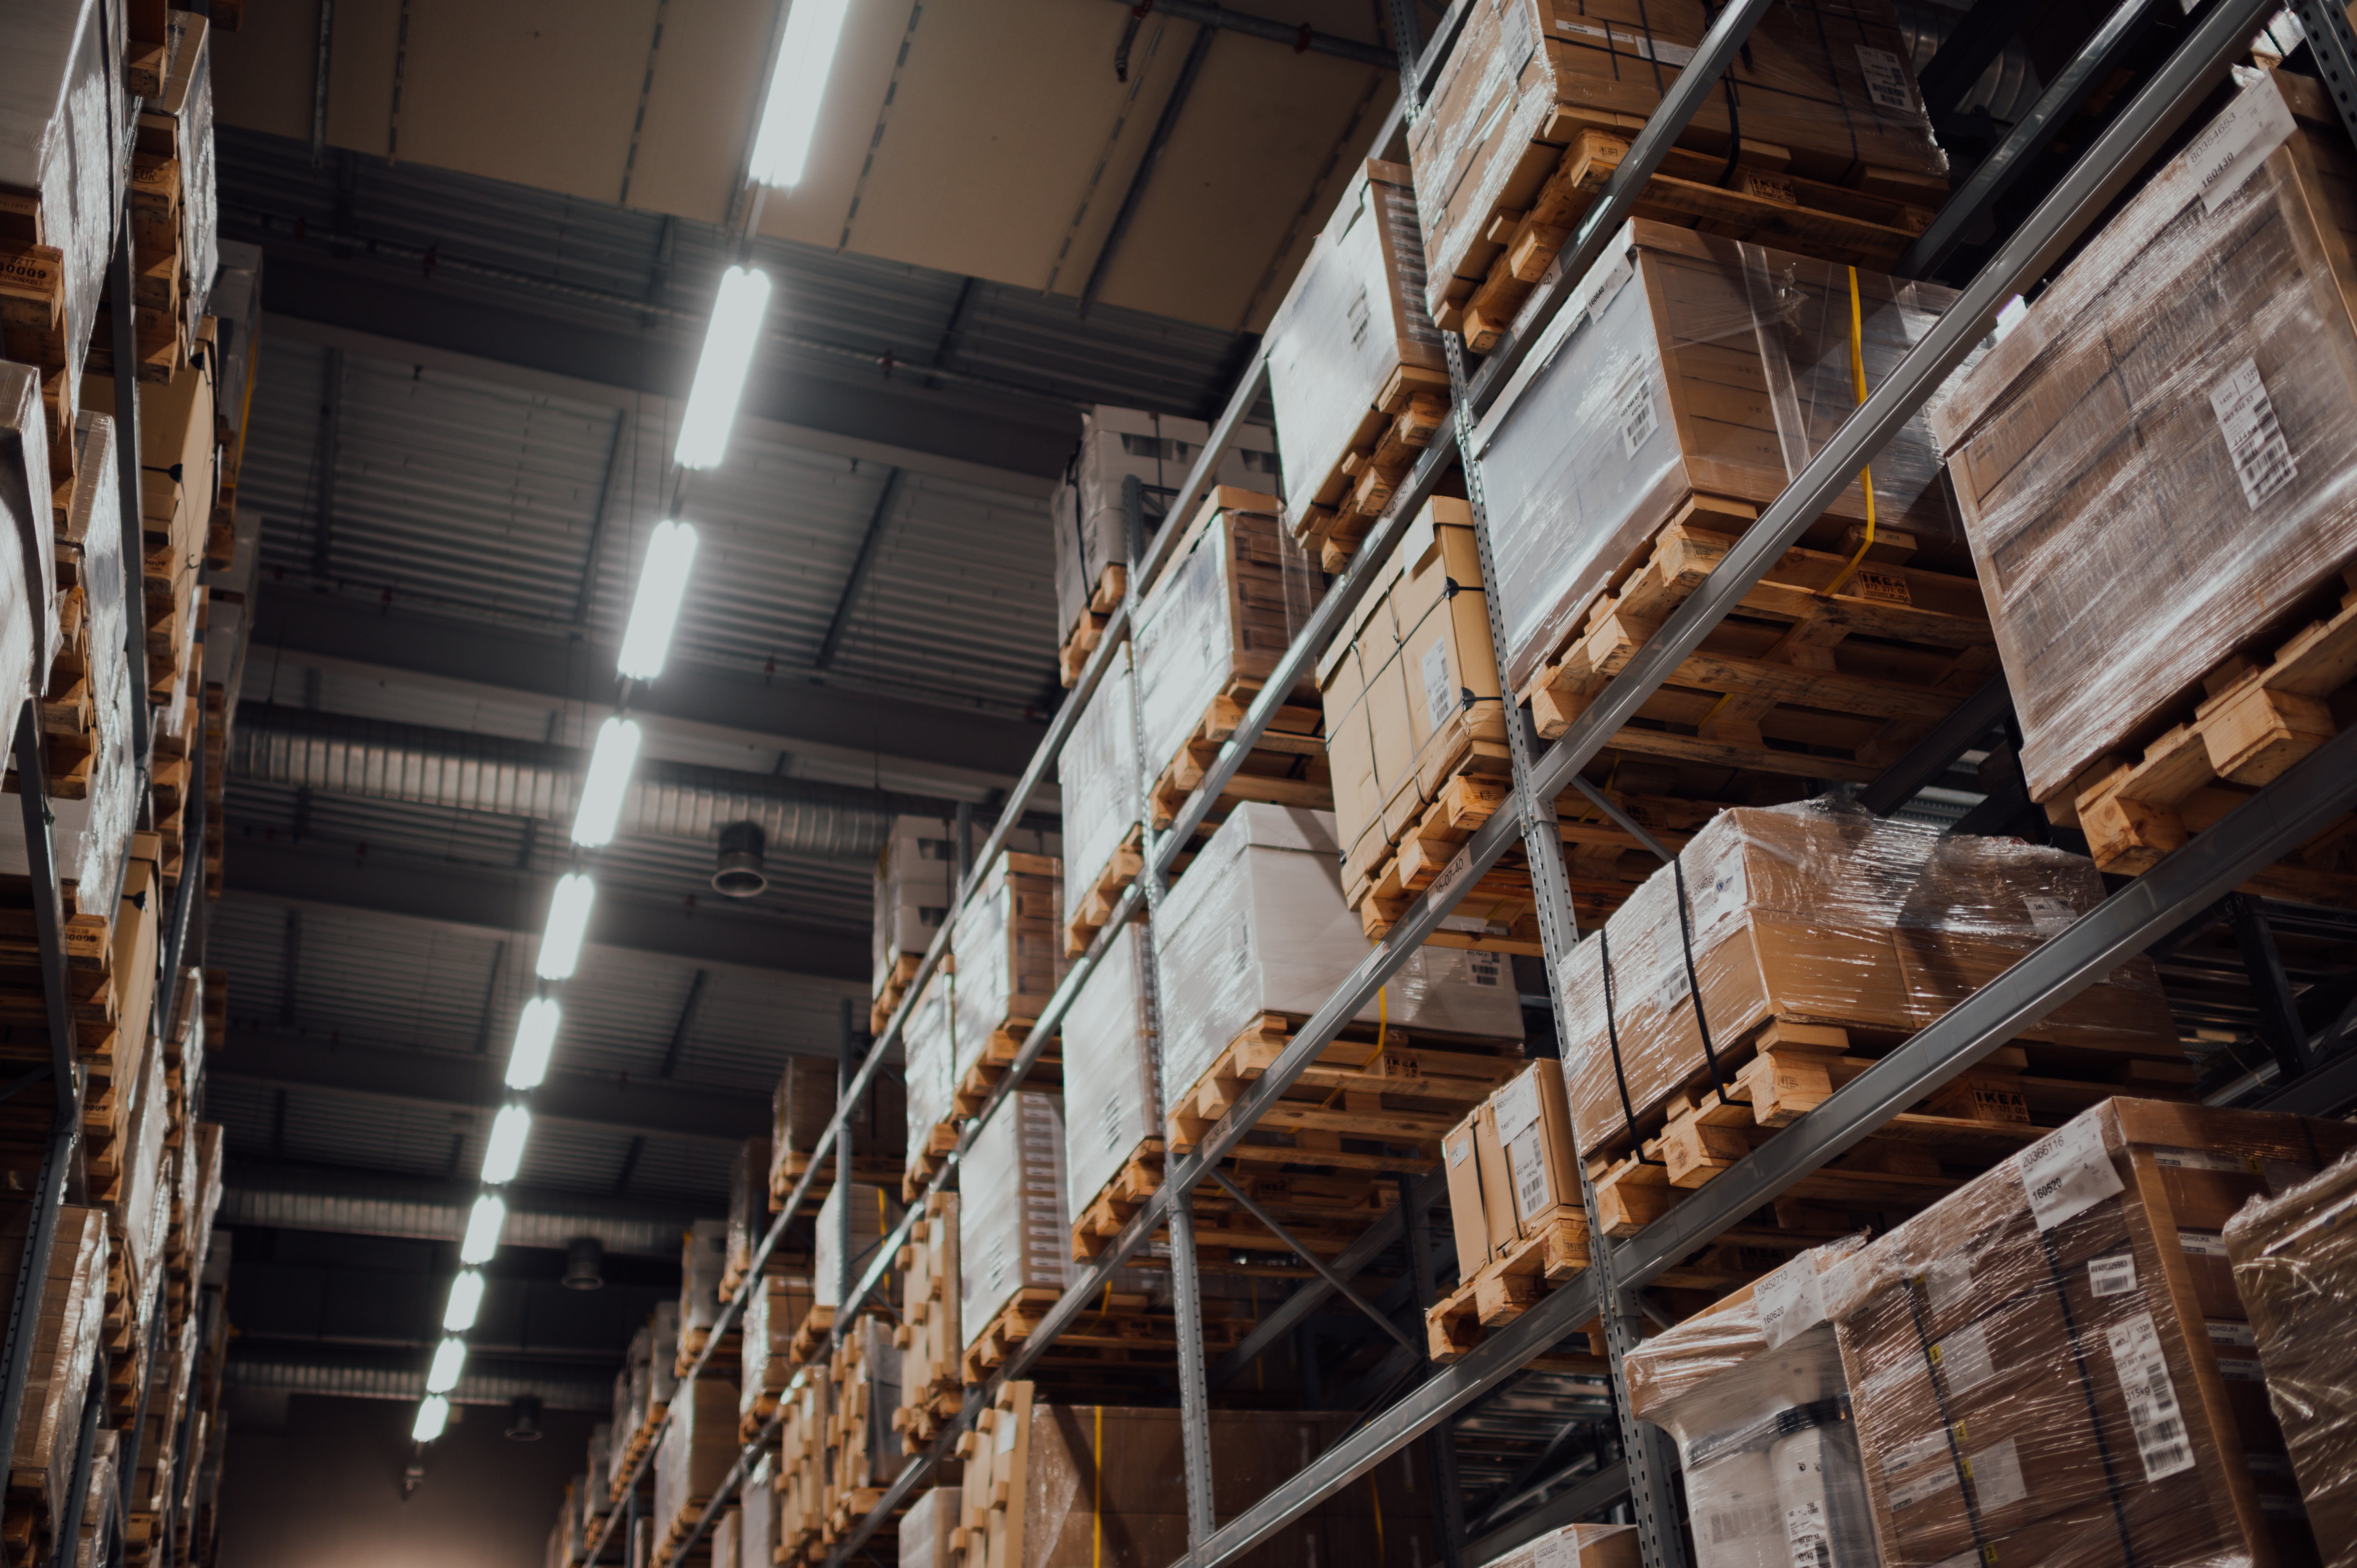 Inventory Tracking In A Warehouse